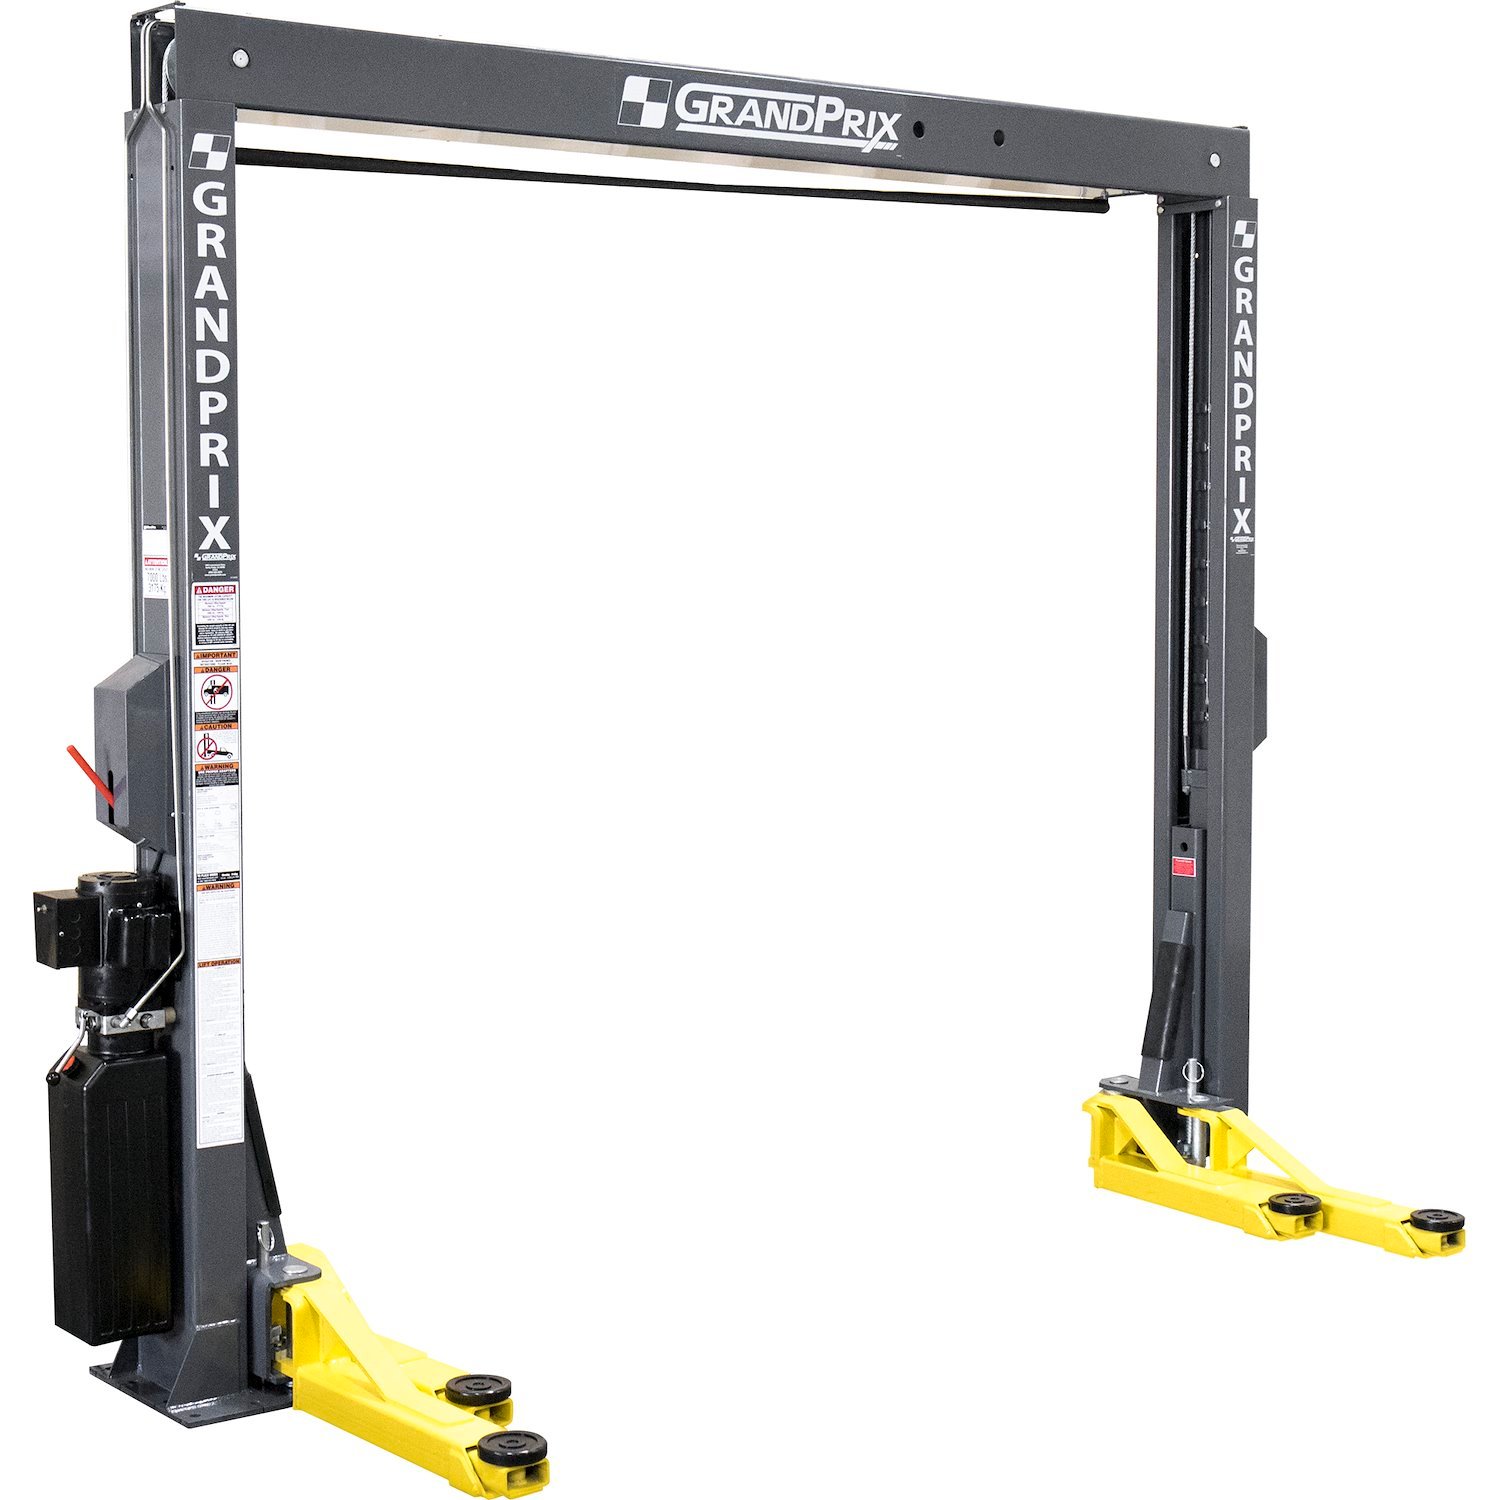 GrandPrix Two-Post Vehicle Lift, 7,000 lbs. Capacity, 68 in. Max Rise